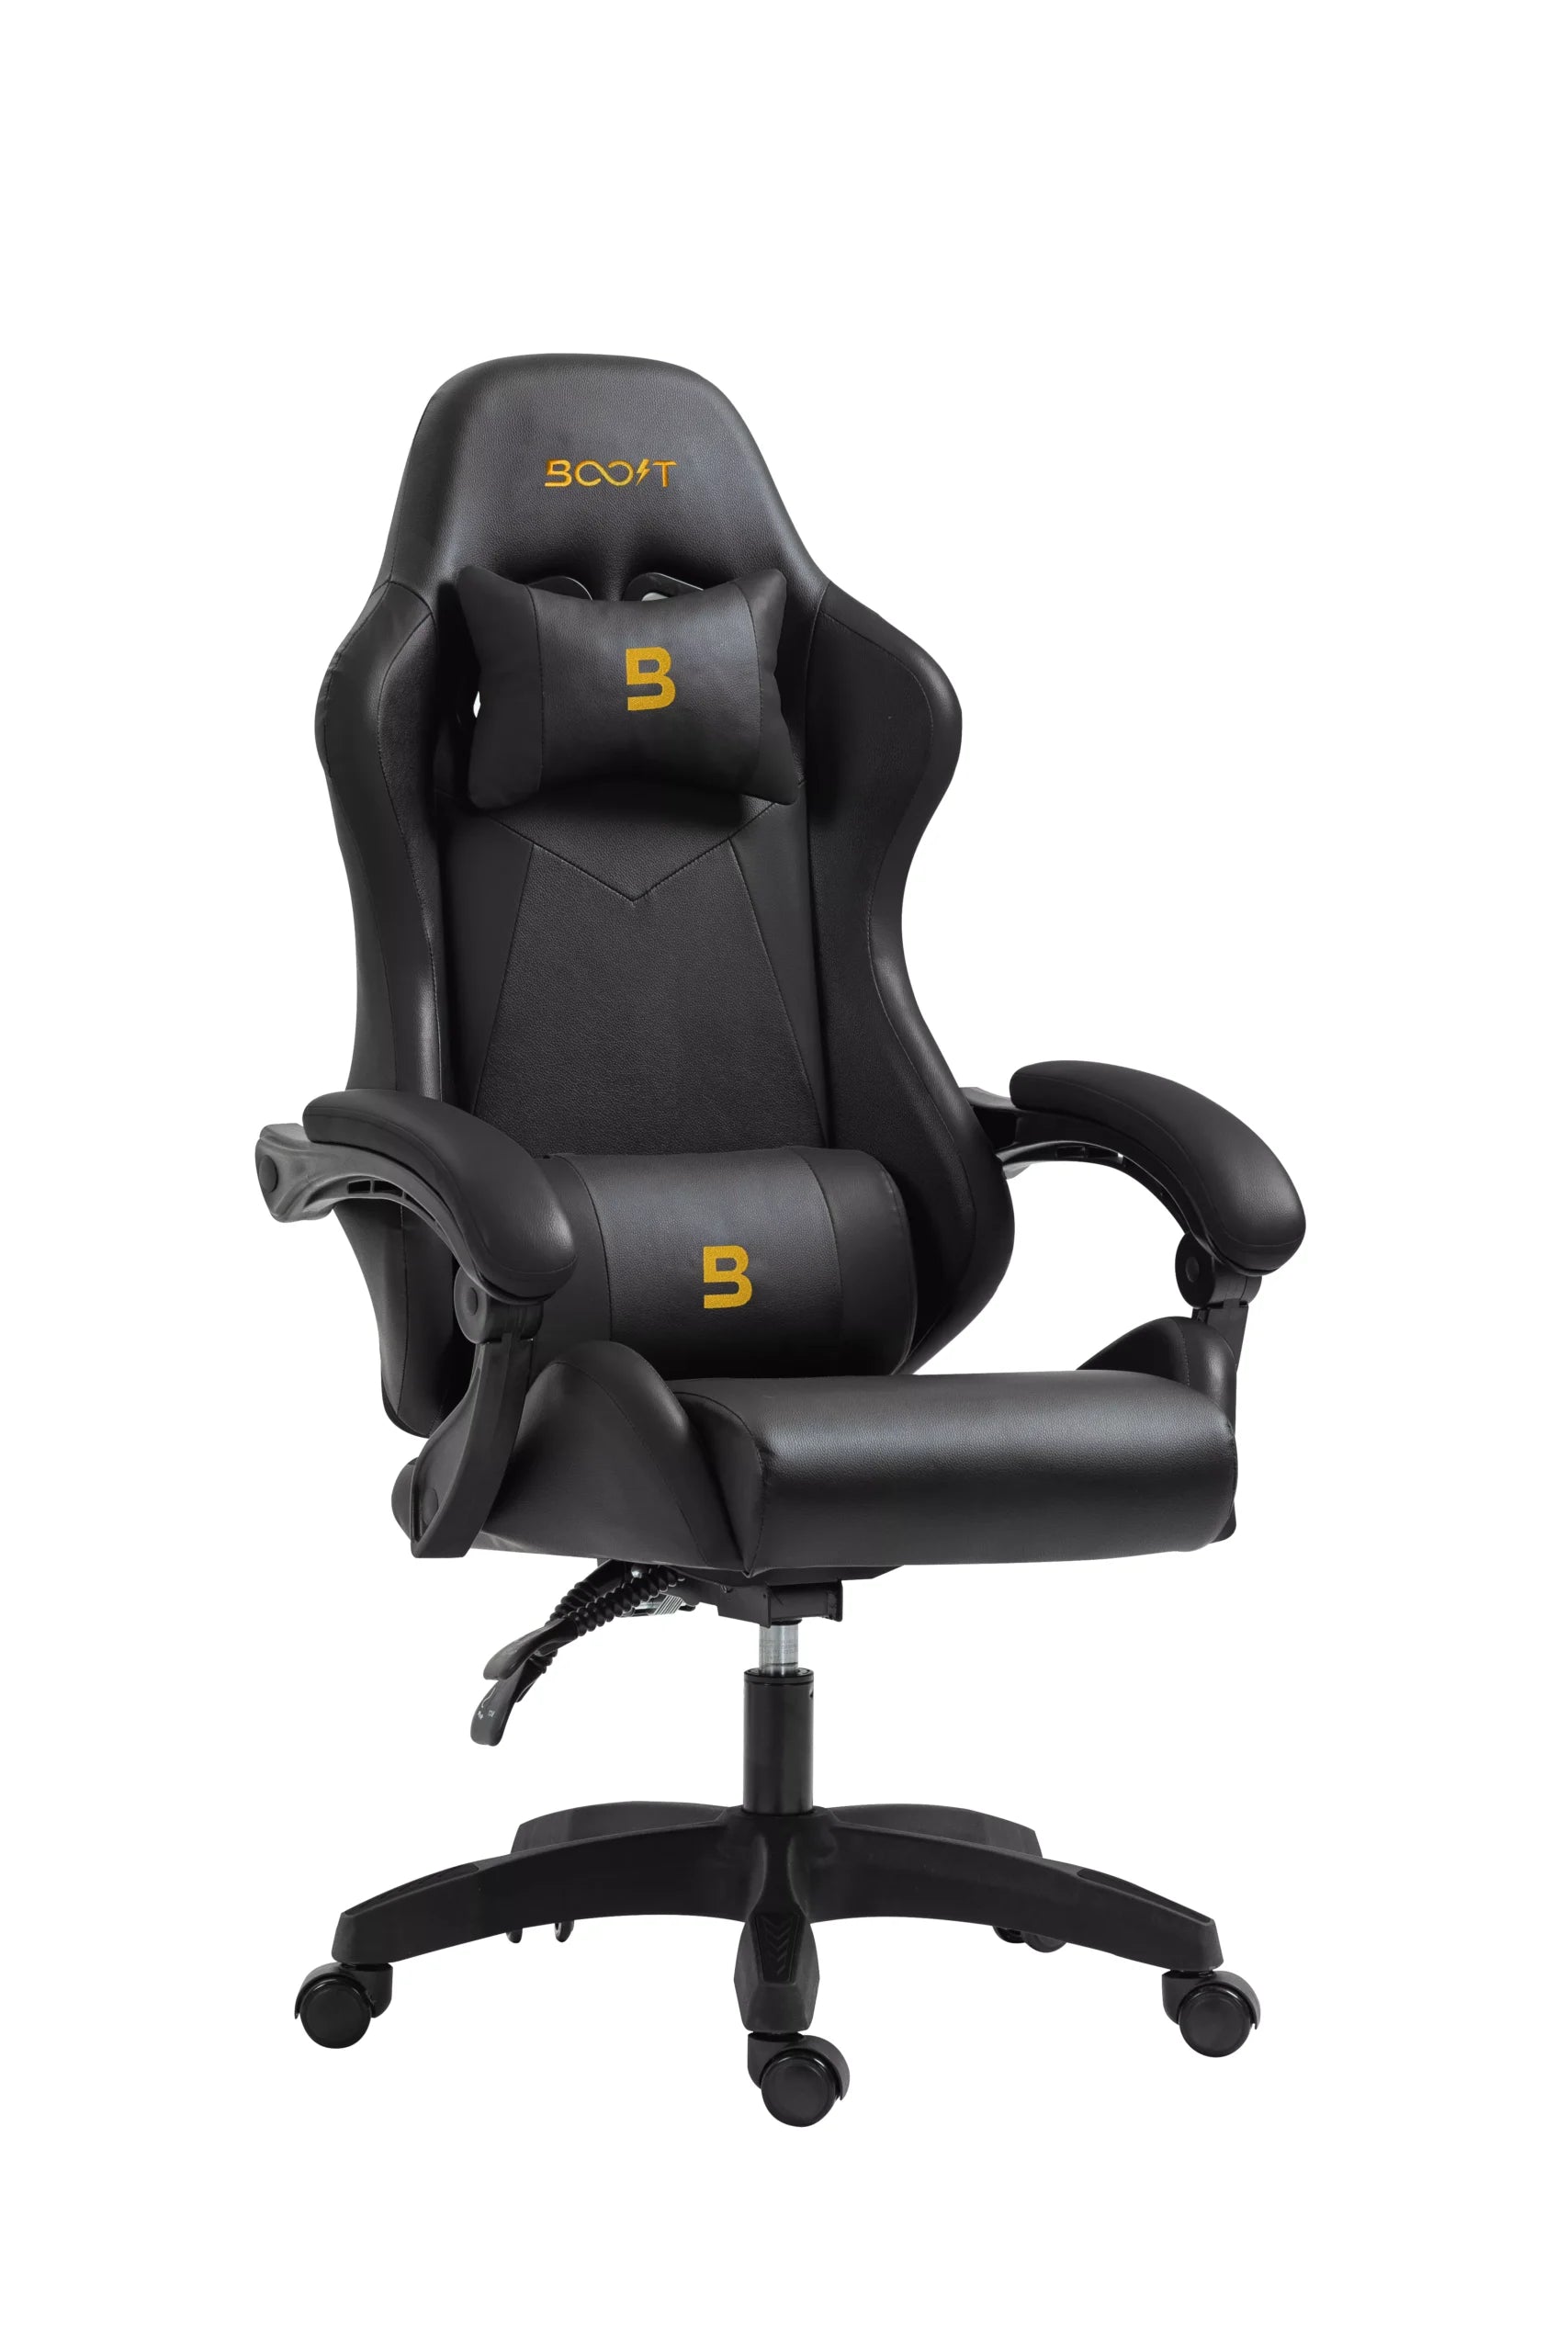 Boost Velocity Pro Gaming Chair Black-1